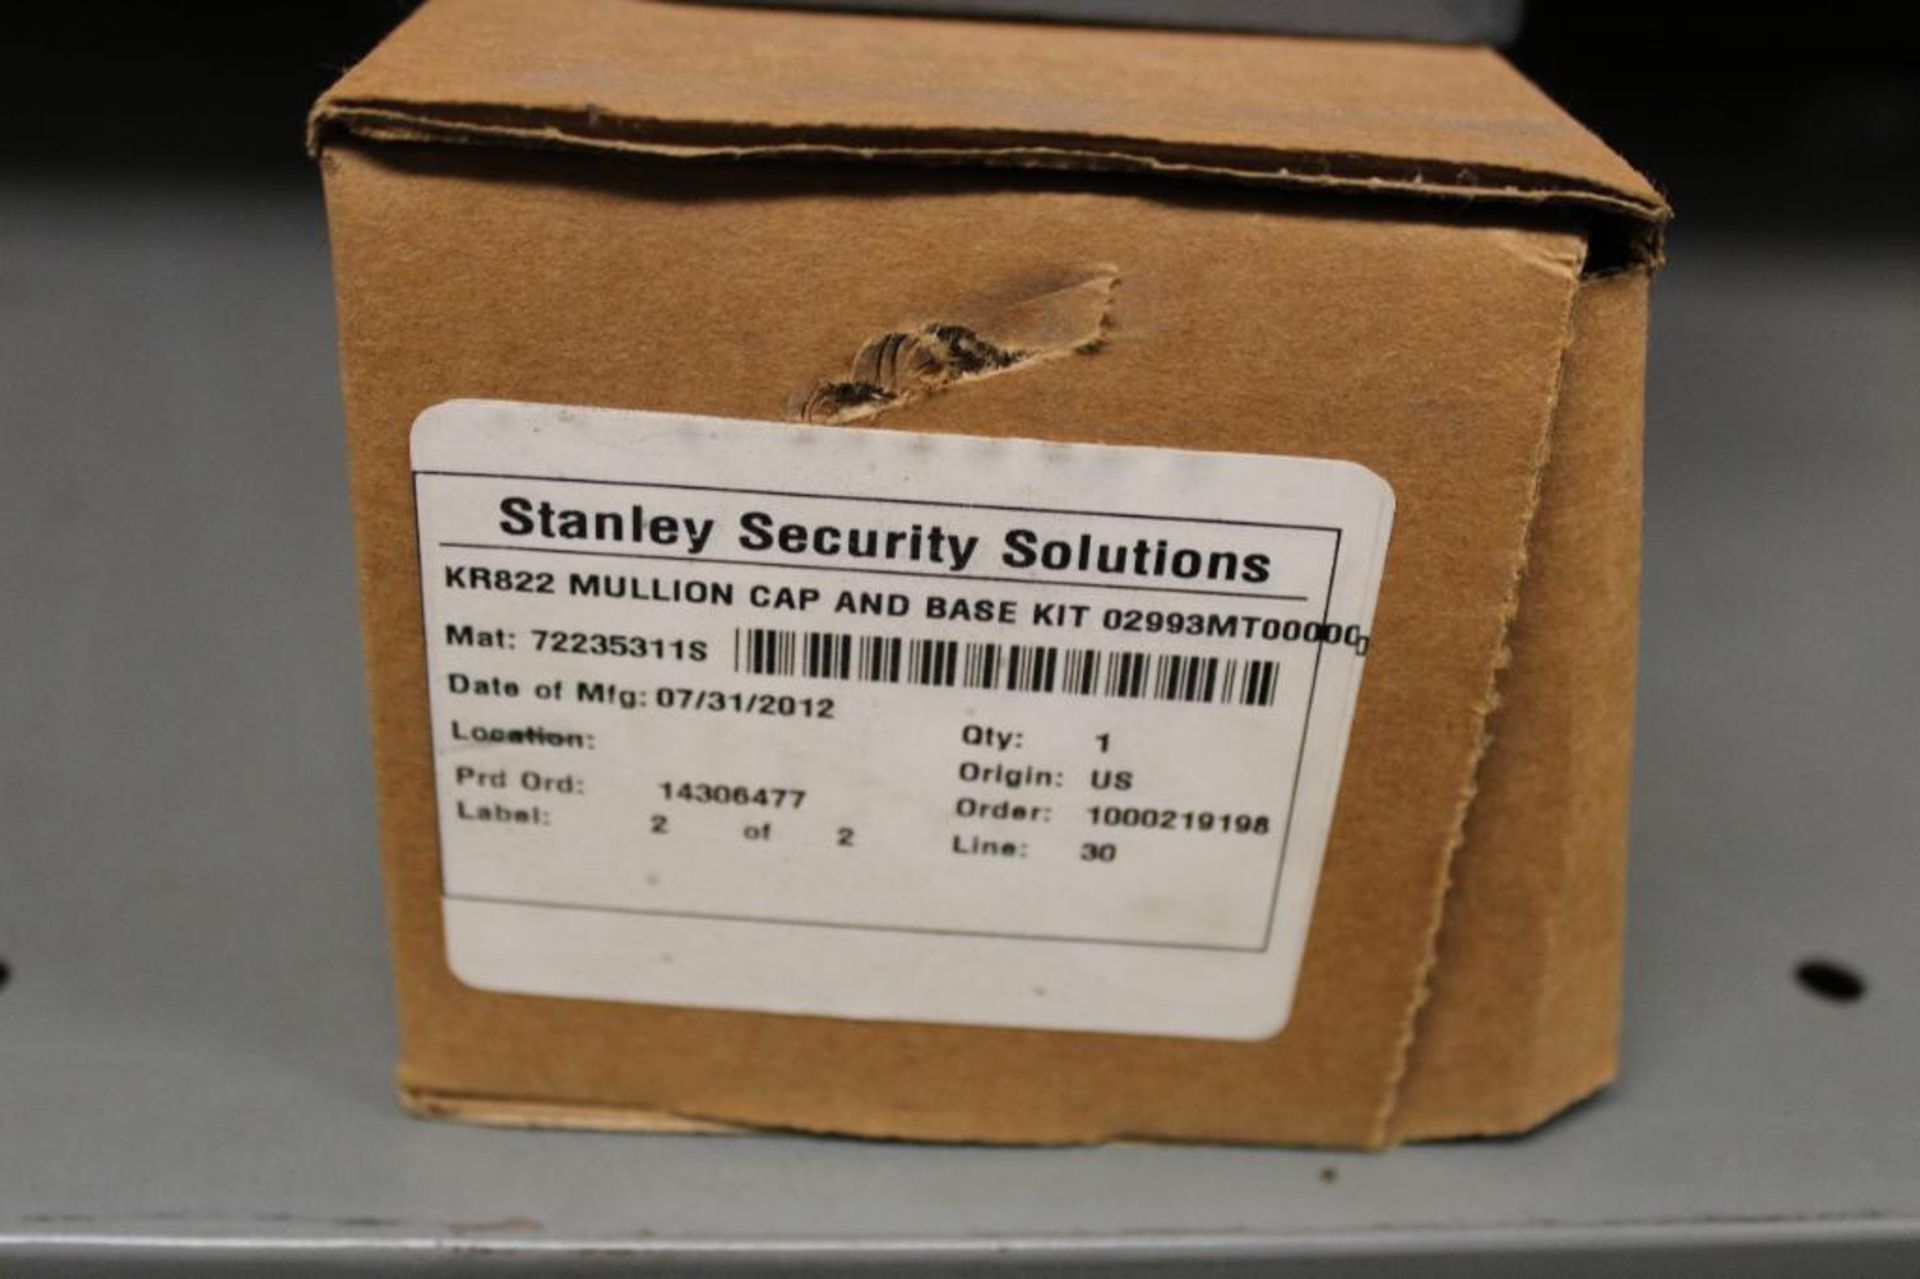 Stanley Security Solutions Mullion Cap and Base Kits KR822 and MKR822-600 Yale Padlocks W/o Cores - Image 6 of 8